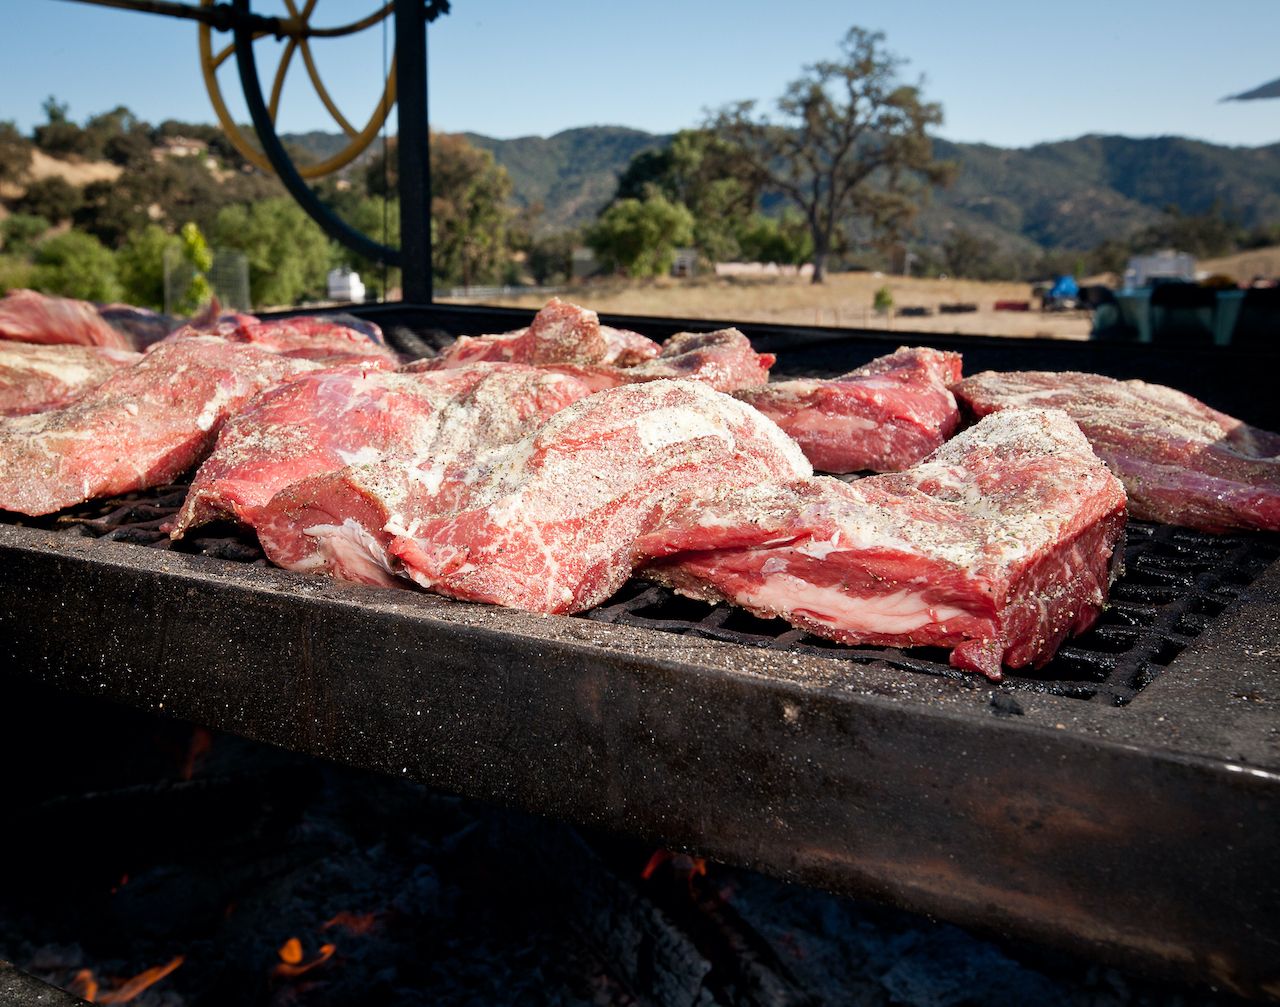 Large pieces of meat being barbecued